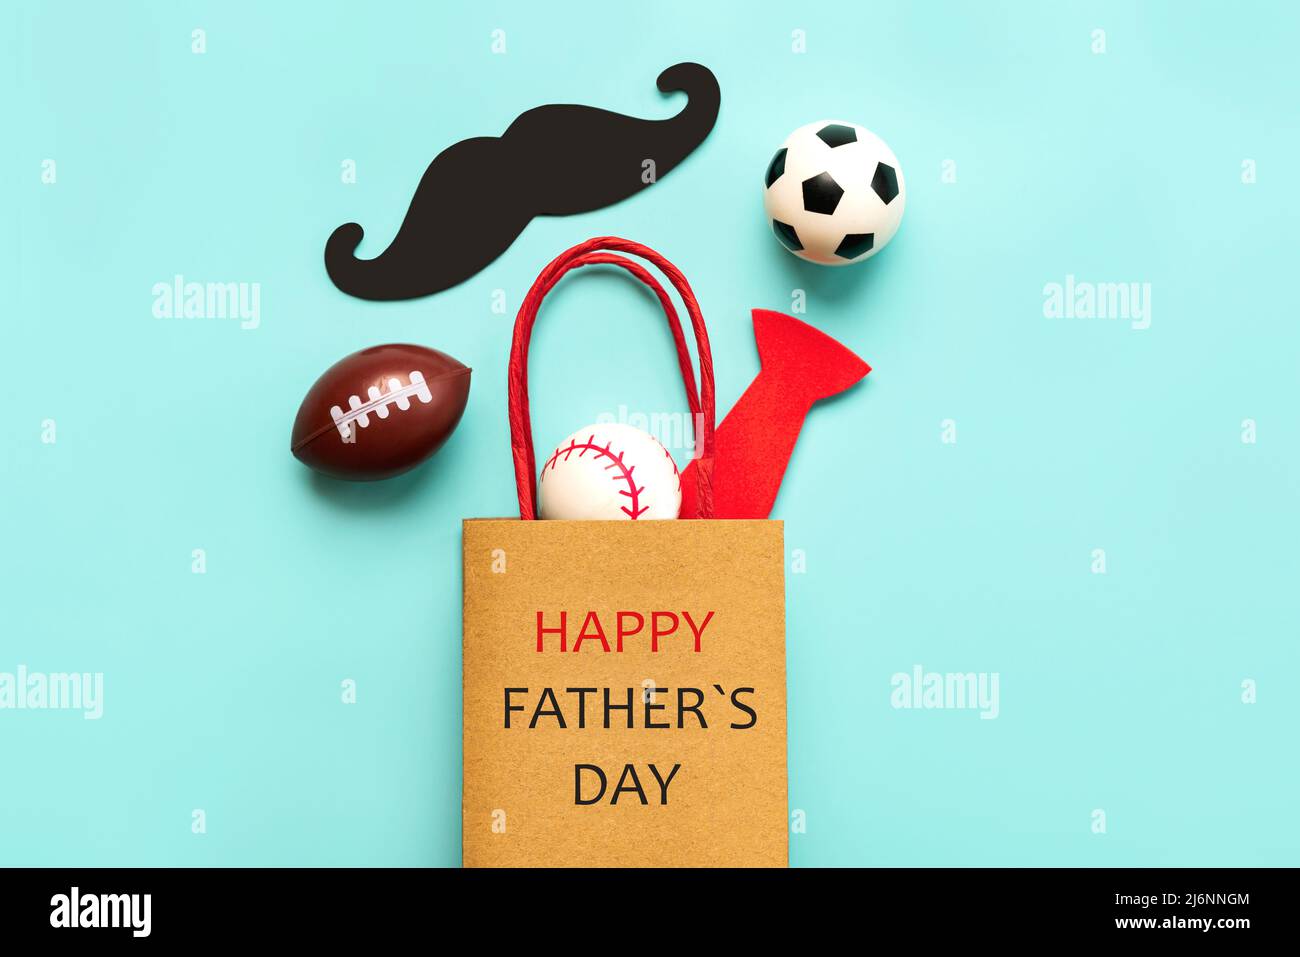 Happy Father's Day. Top view of shopping bag with false mustache,false bow tie and sports balls over blue background. Father's Day celebration concept Stock Photo